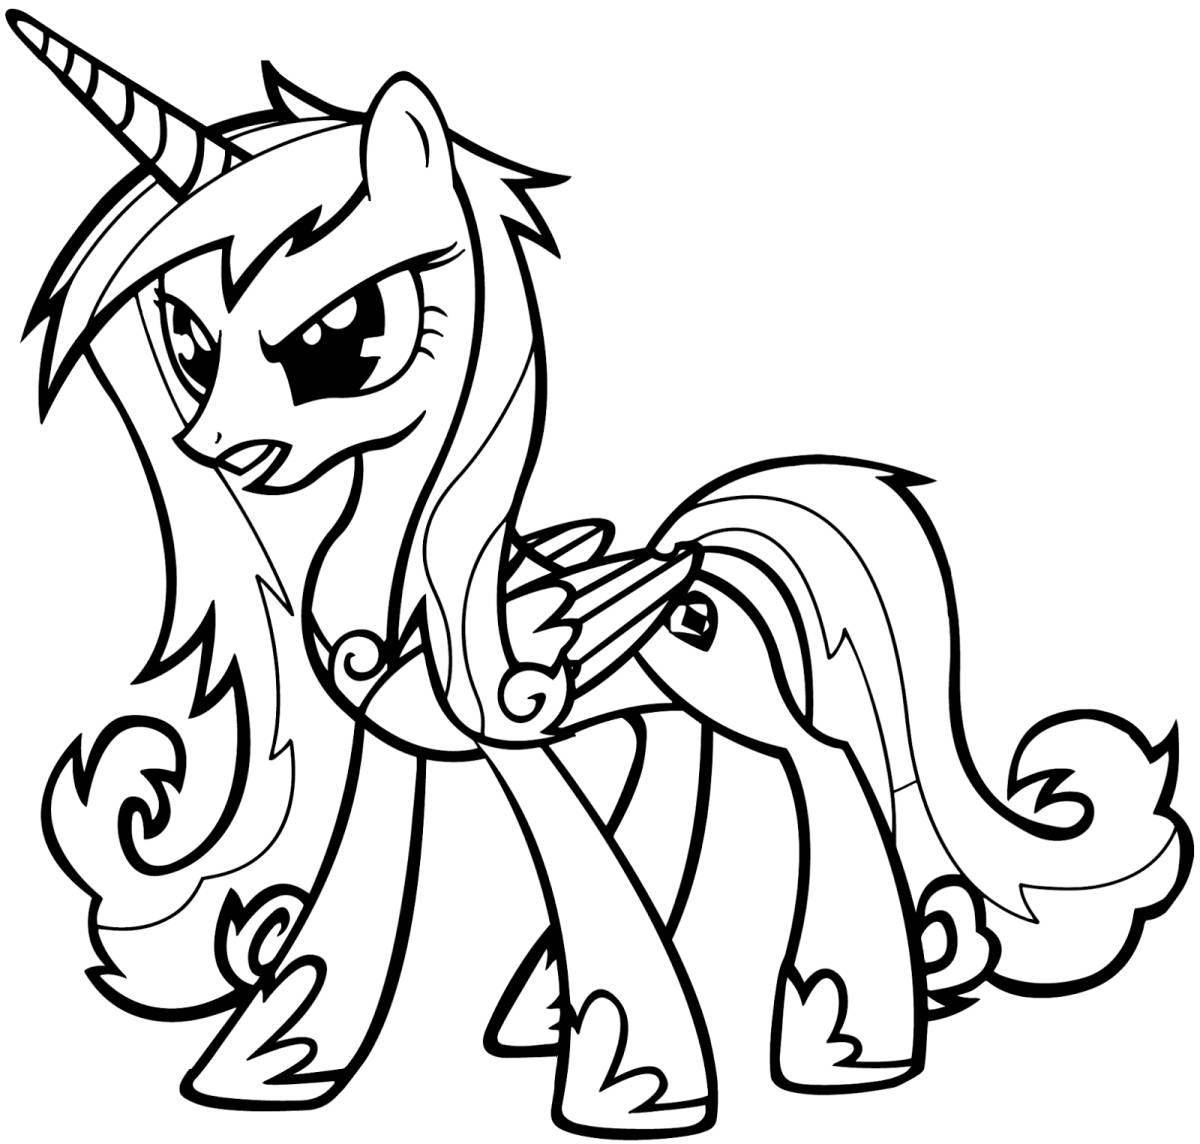 Playful cadence coloring page